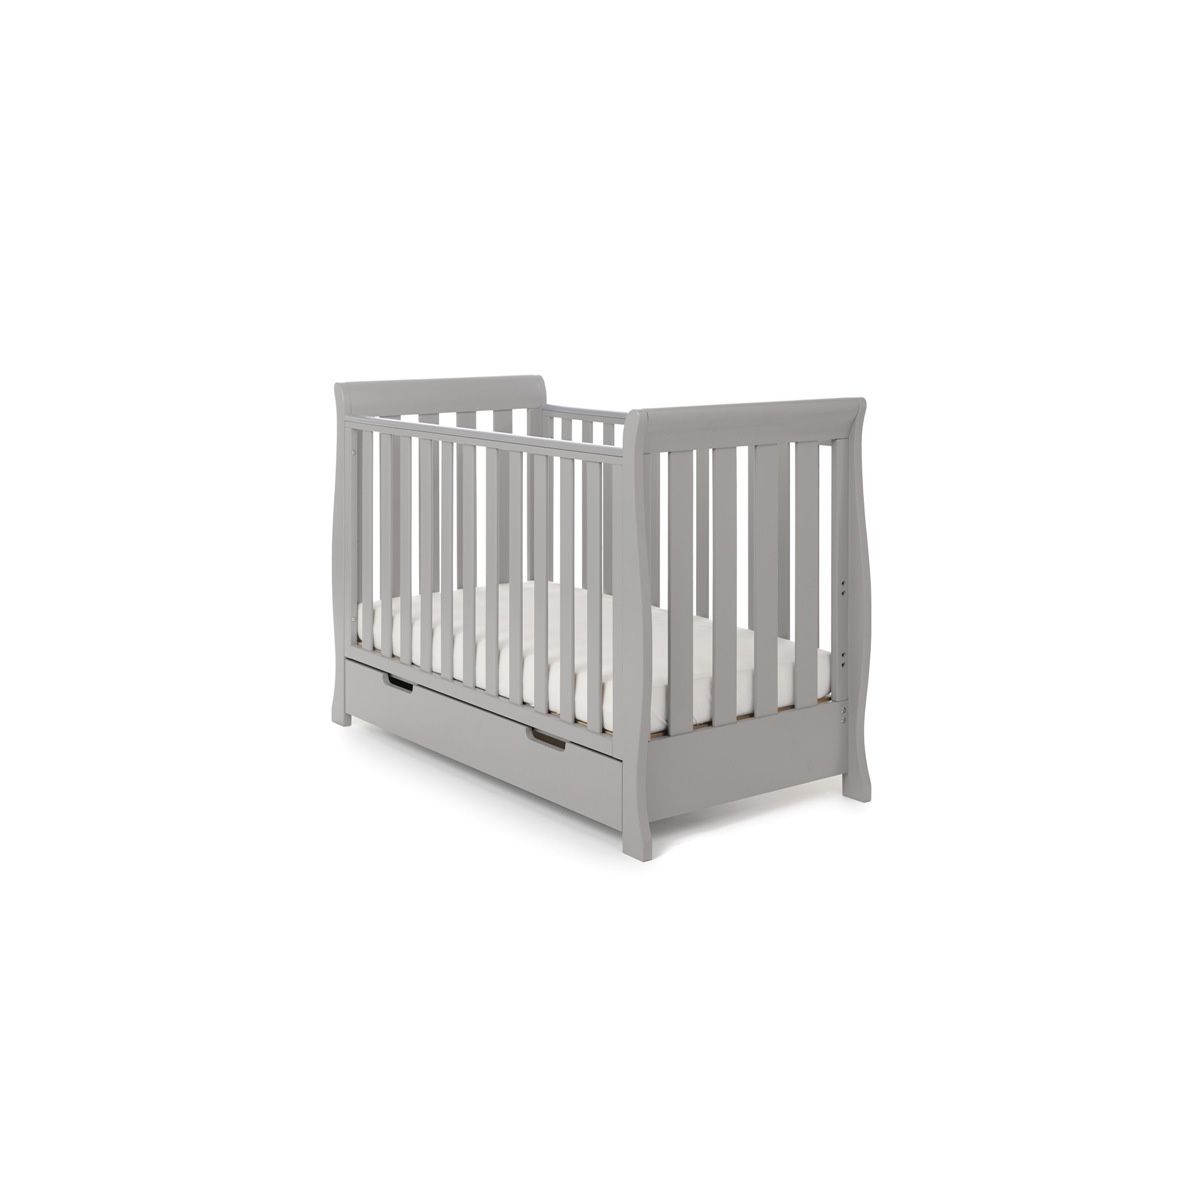 Obaby Stamford Mini Sleigh Cot Bed Including Underbed Drawer